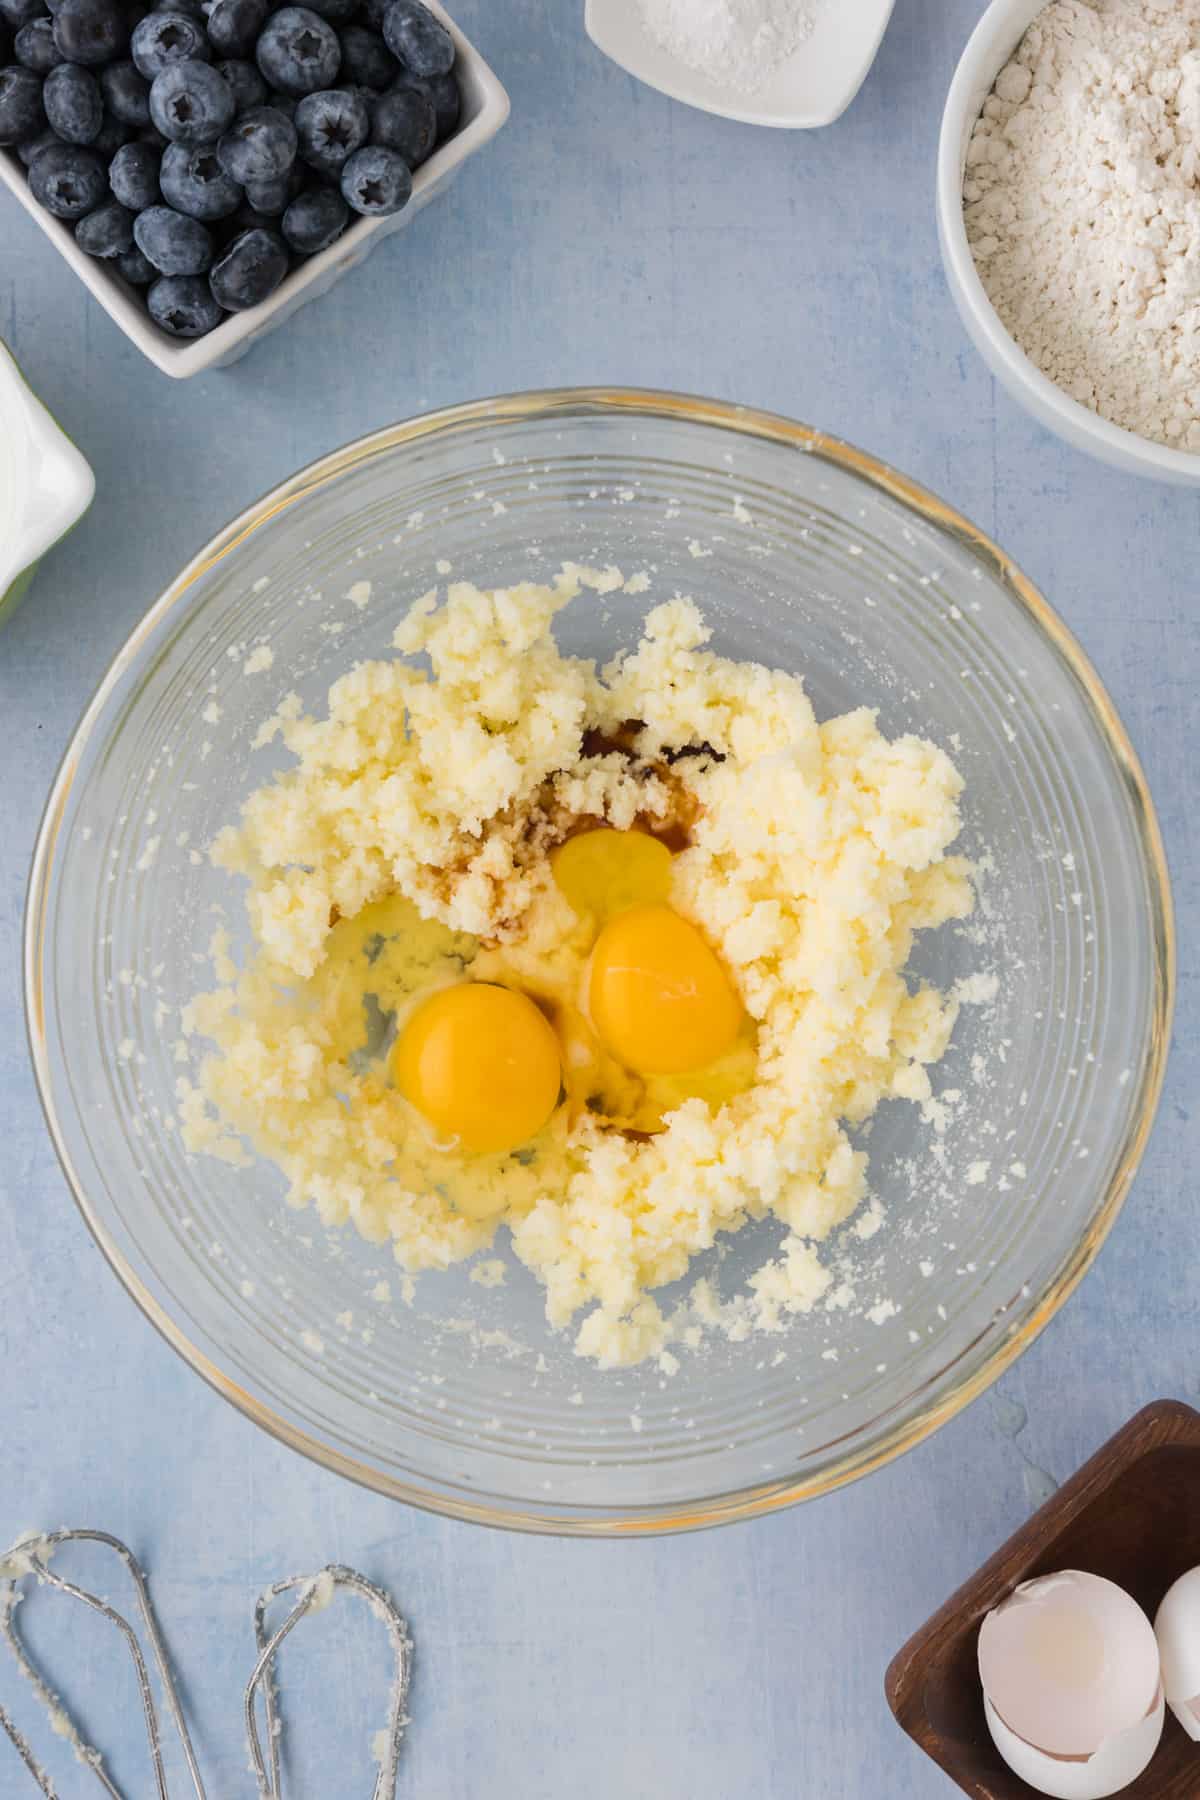 Eggs, flour, sugar and blueberries in a bowl on a blue background.